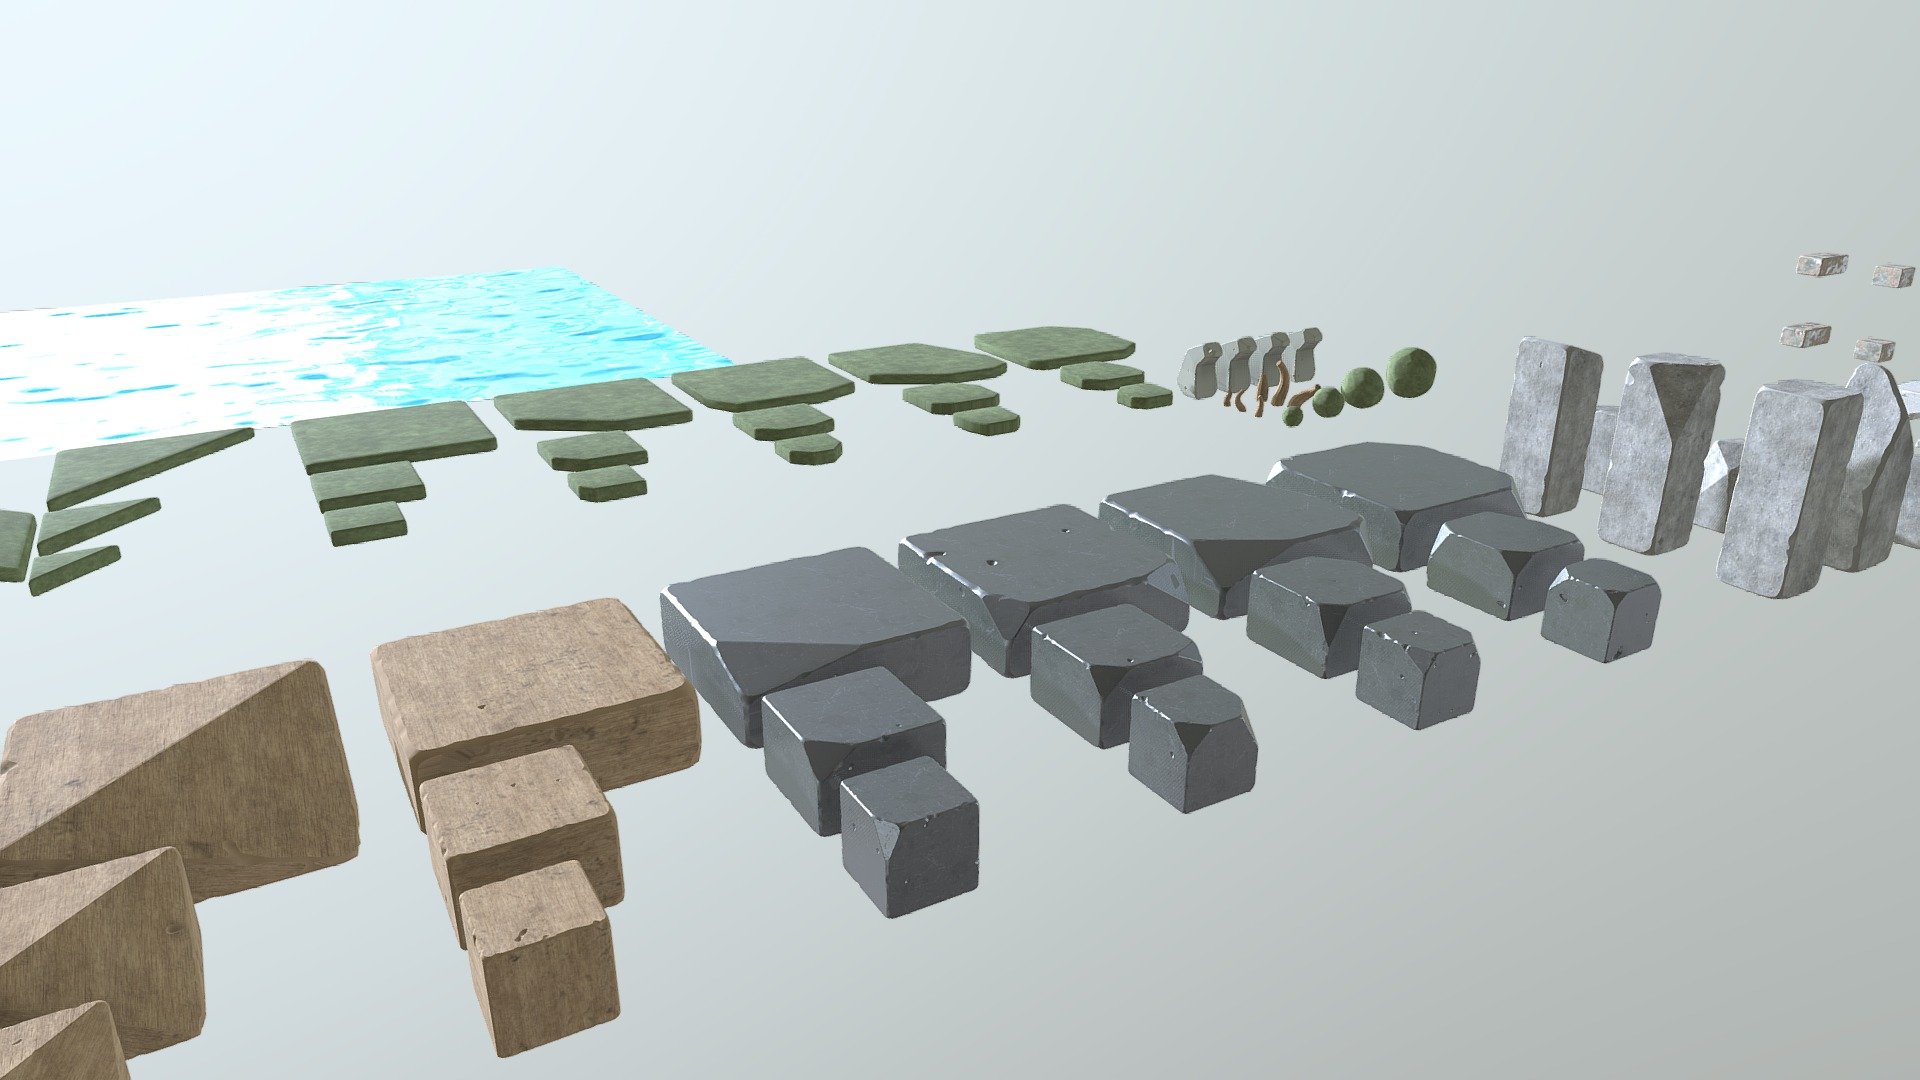 This asset pack contains various blocks and objects that are constrained to a grid, allowing for easy modular construction of game levels.

For an example of what can be achieved with these assets, check out this scene I made 3d model